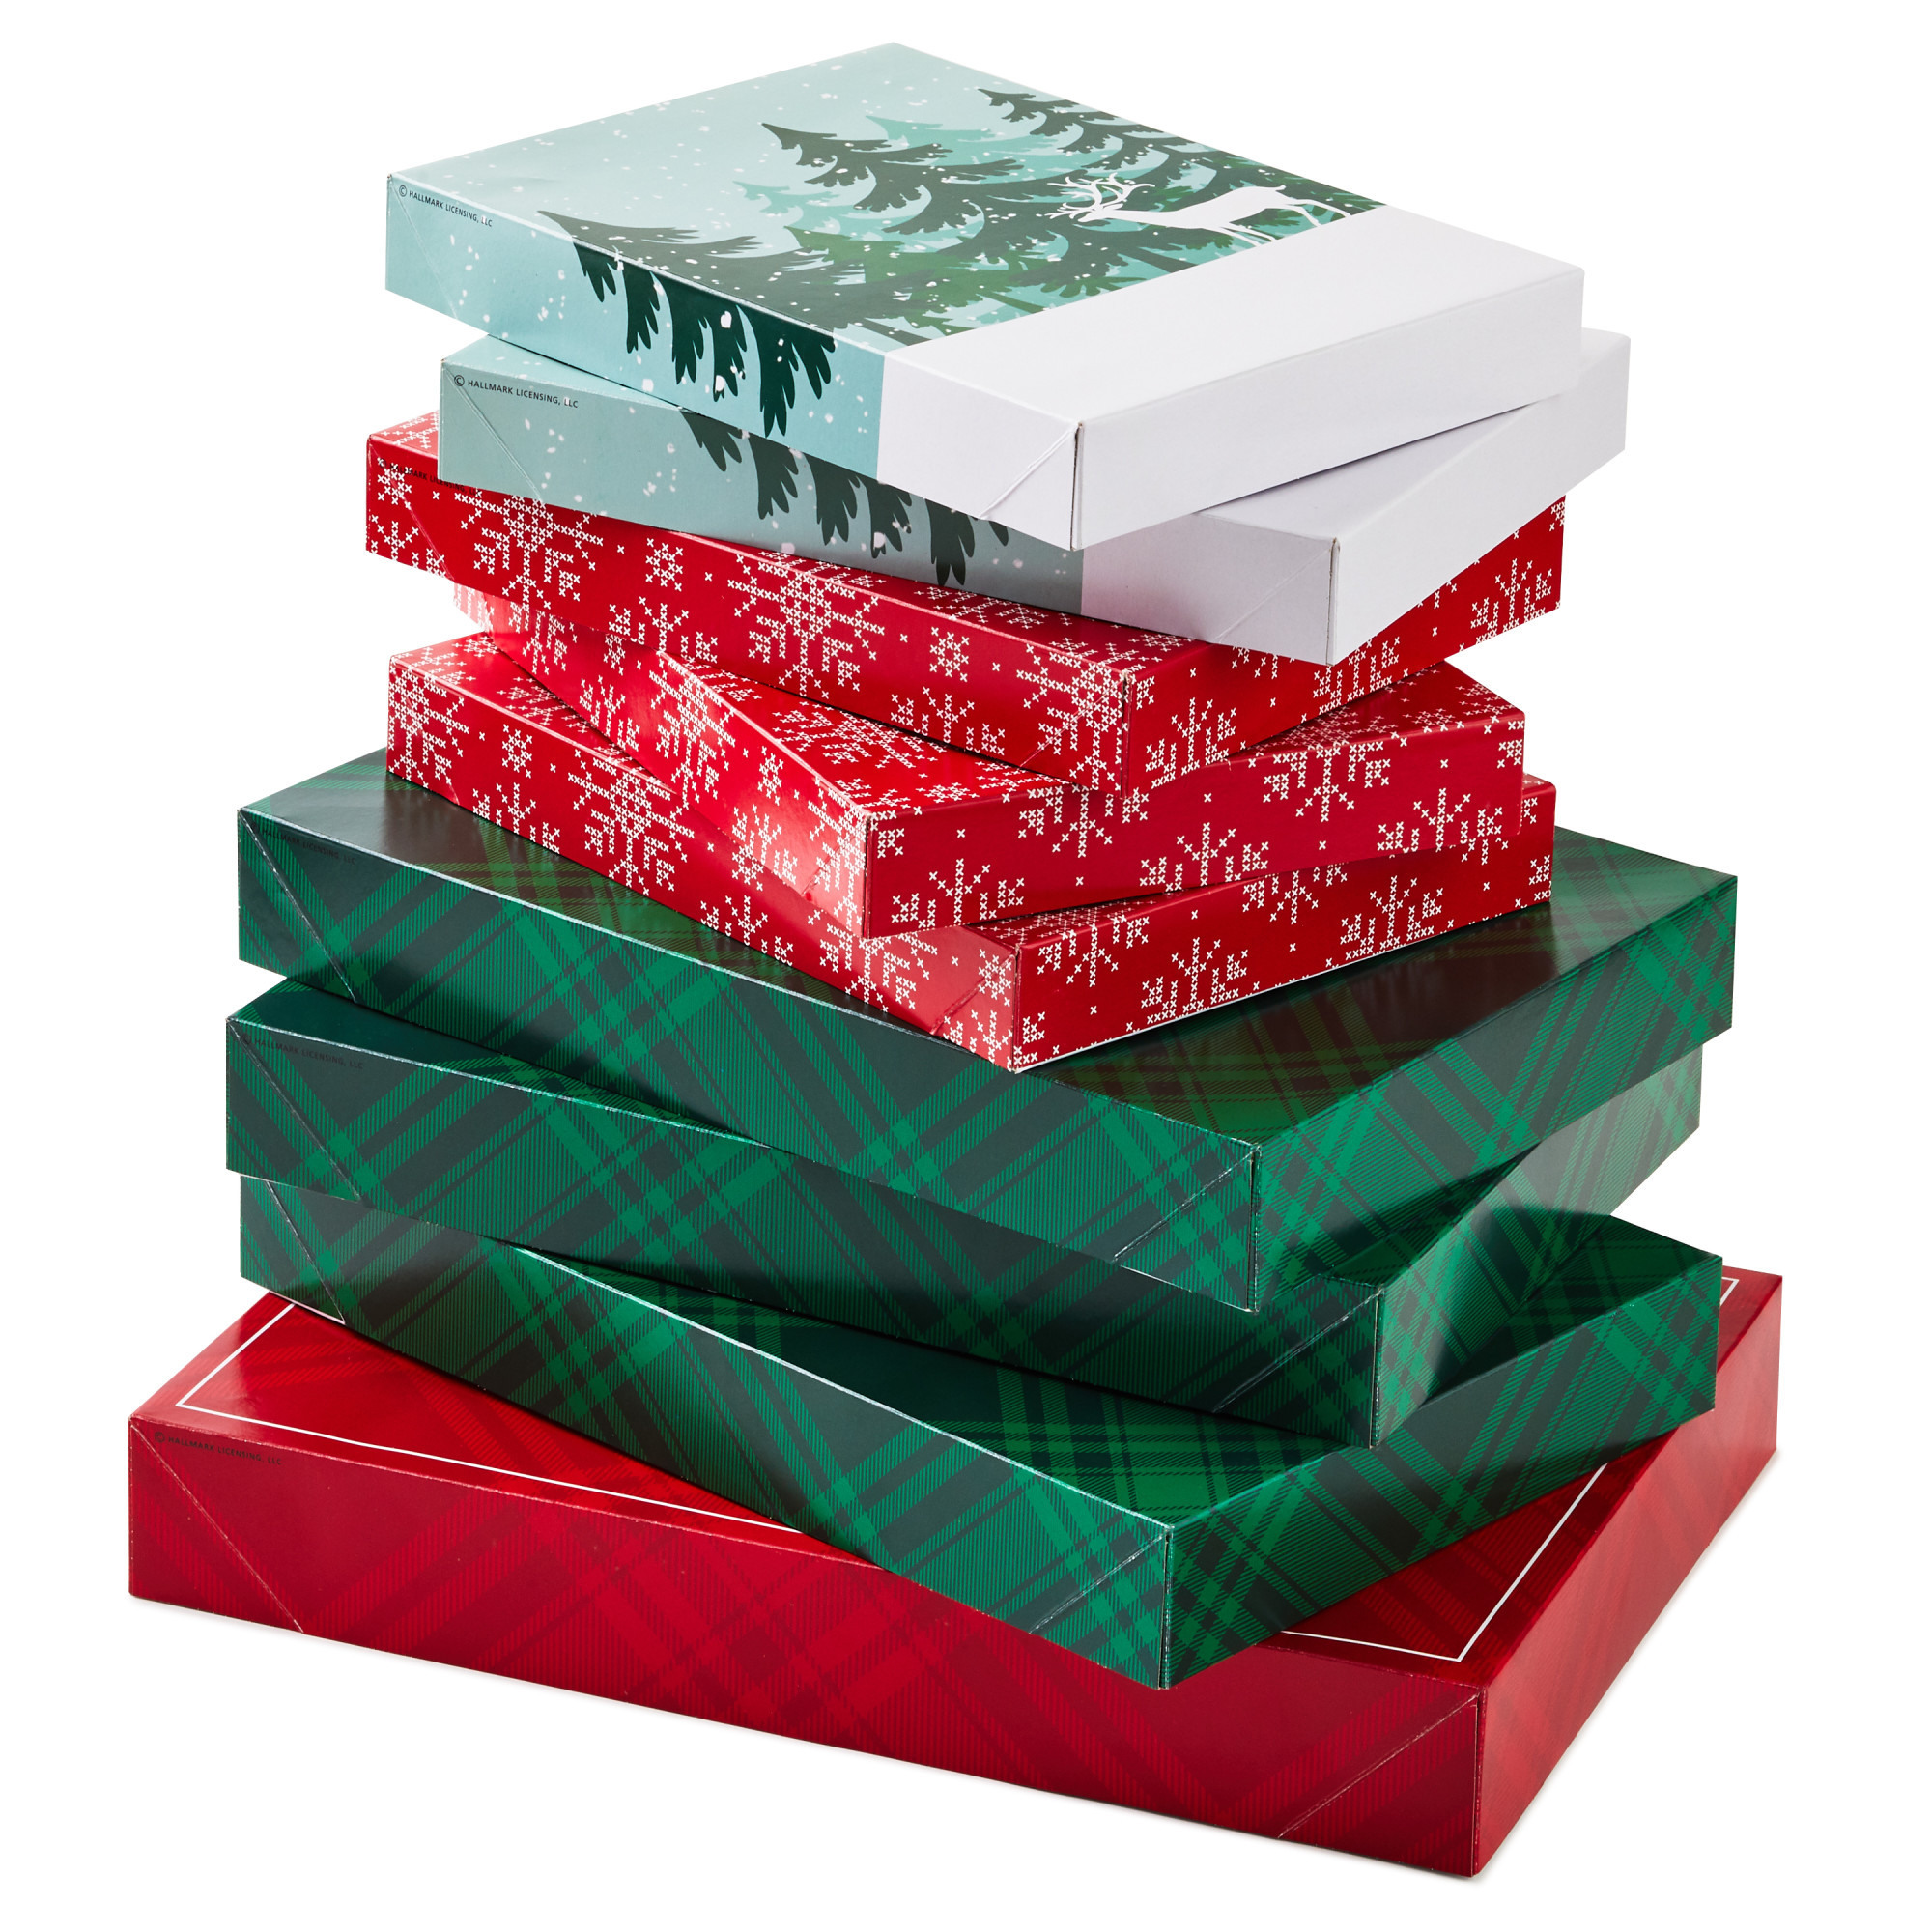 hallmark-christmas-gift-boxes-9-pack-assorted-traditional-designs